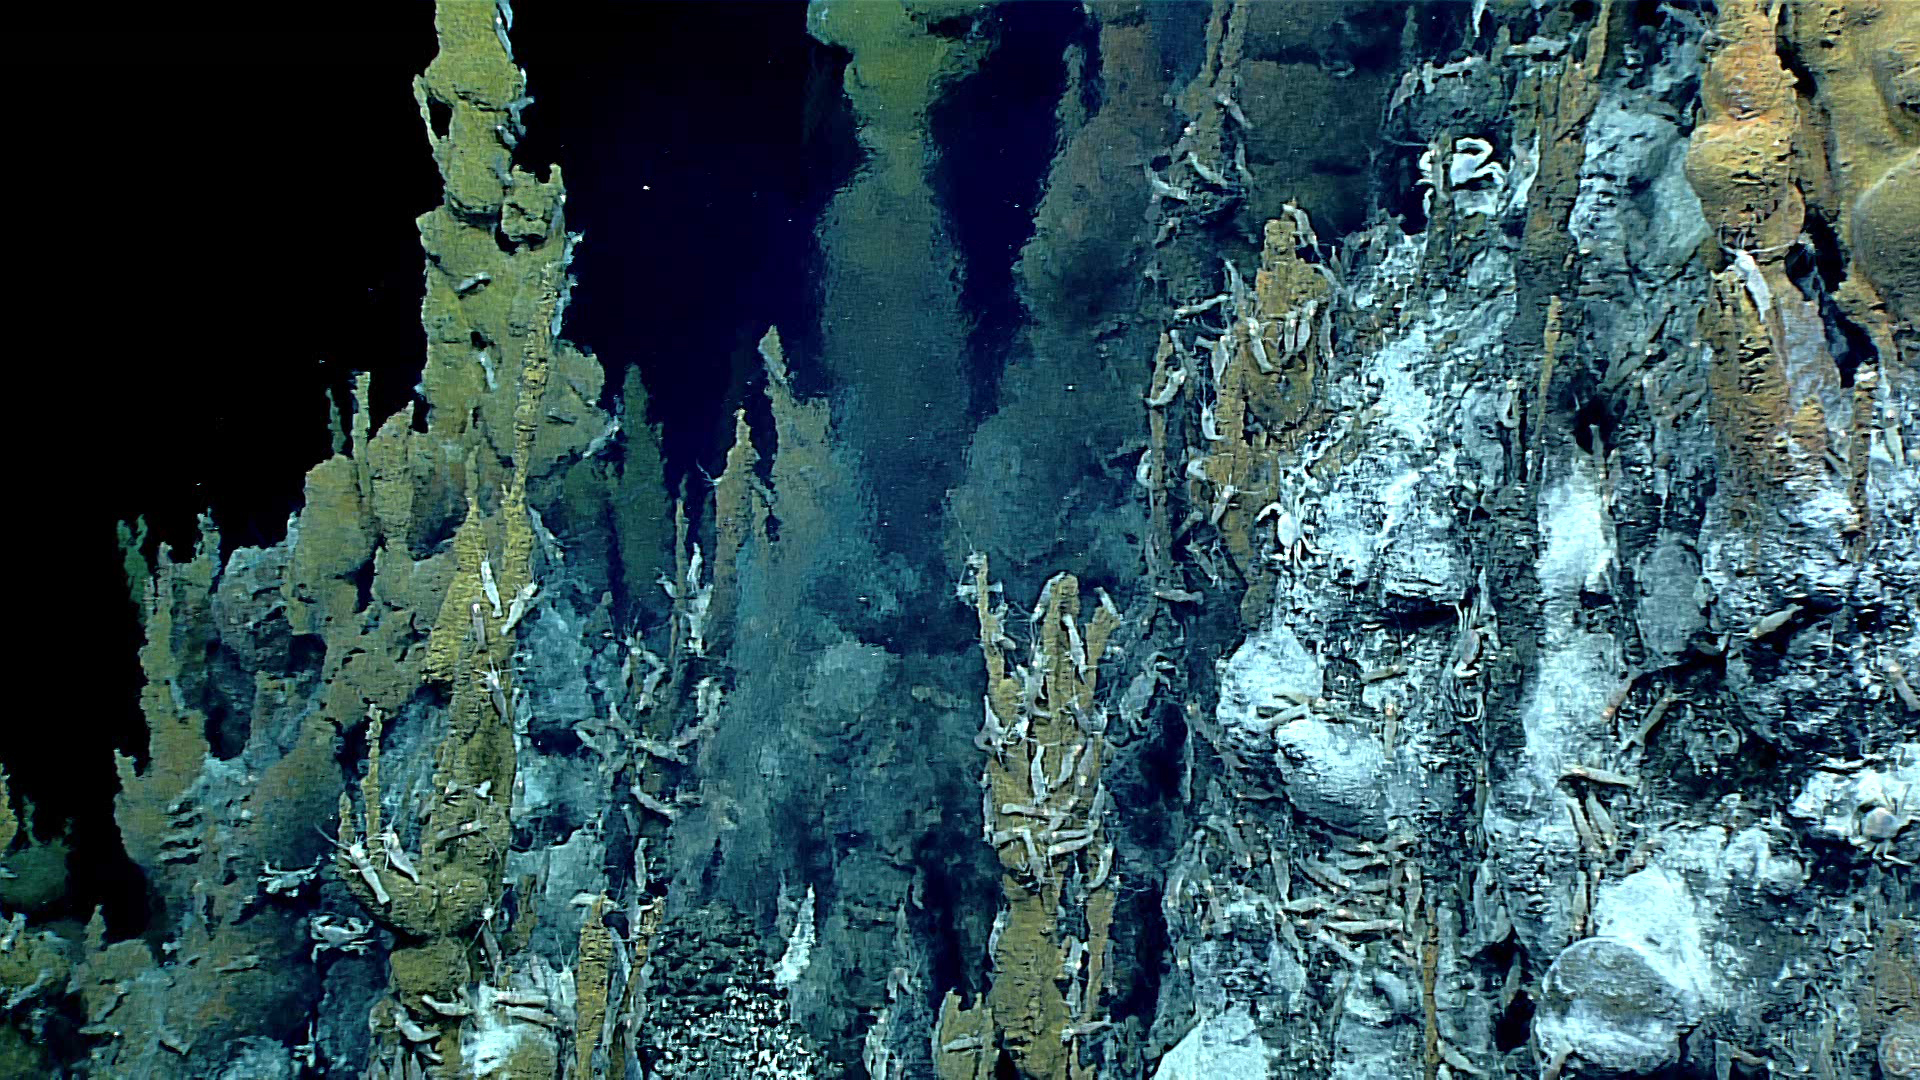 An image of a hydrothermal vents.